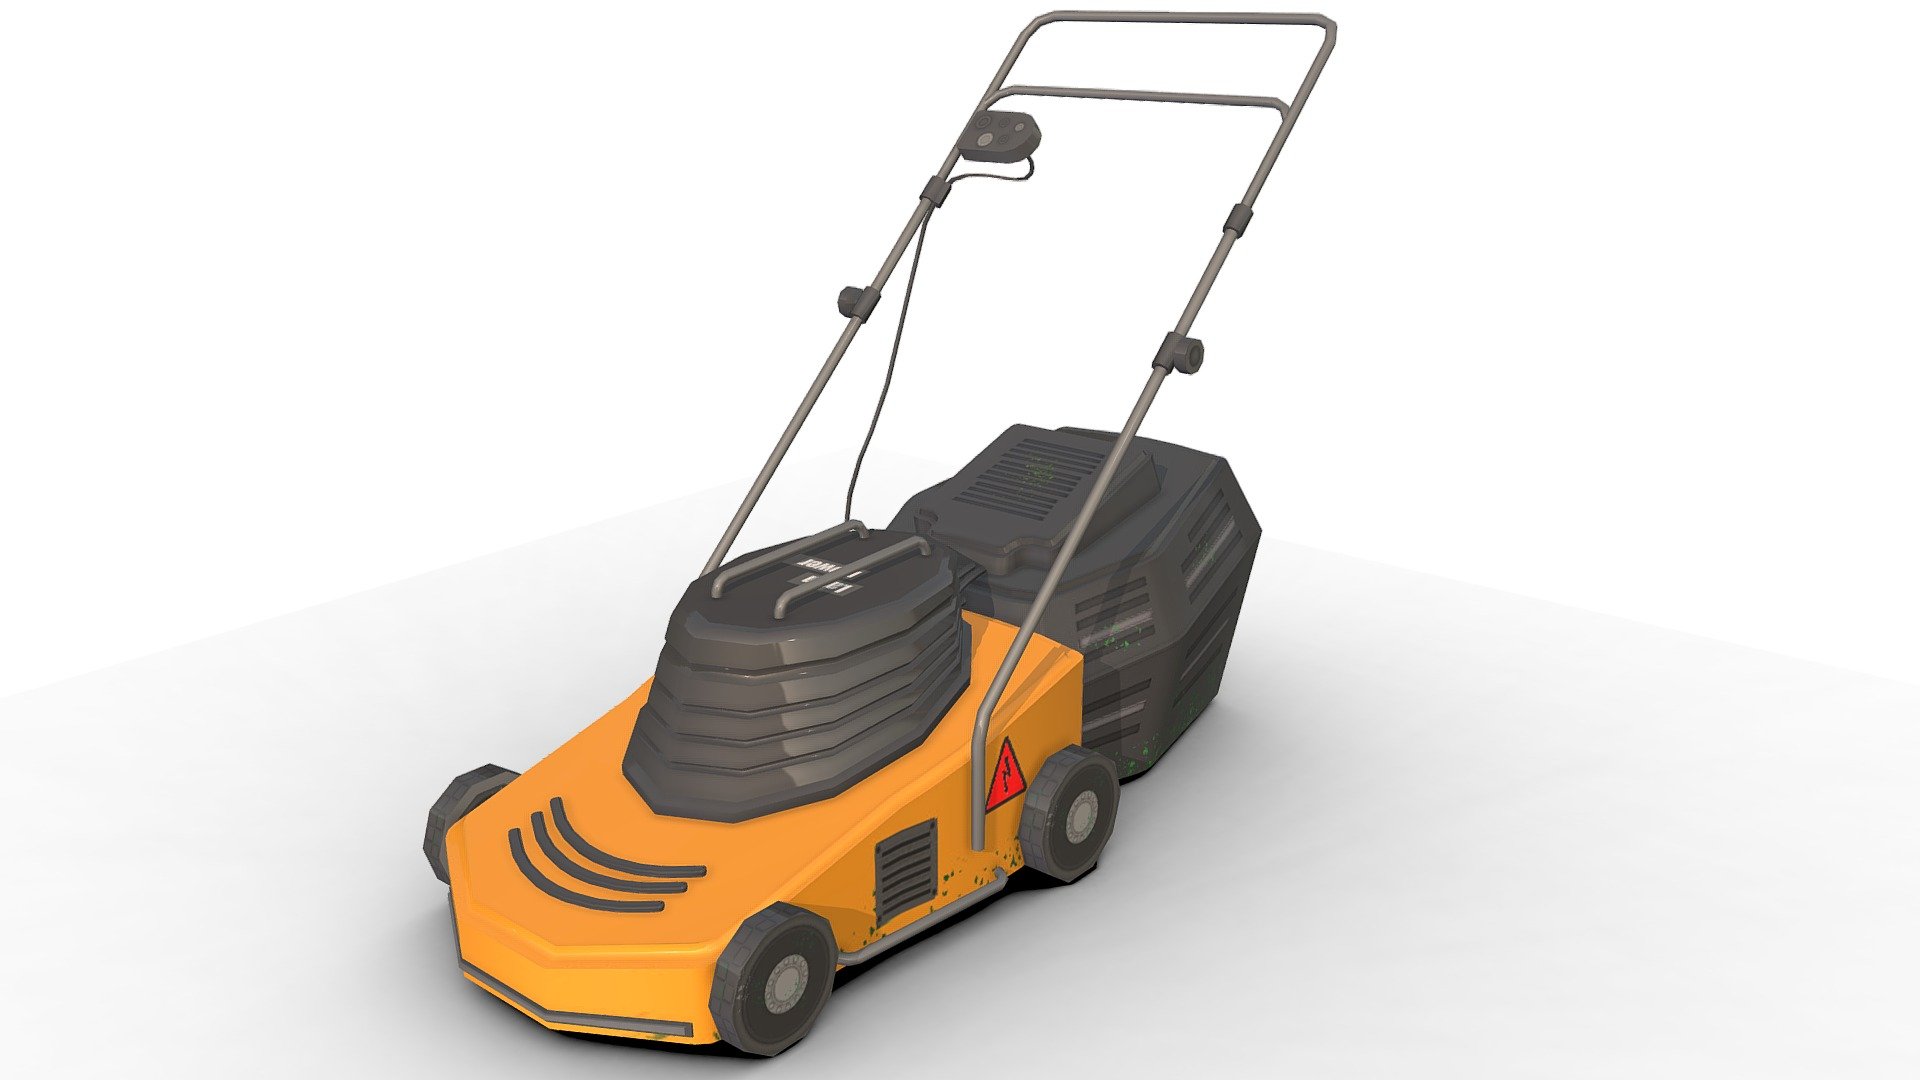 Lawn-mower Low_Poly .

You can use these models in any game and project.

This model is made with order and precision.

Separated parts (bodys . wheels . Steer . Forks ).

Very Low- Poly.

Truck have separate parts.

Average poly count: 3,000 tris.

Texture size:1024 (PNG).

Number of textures: 1.

Number of materials: 1.

Format: Fbx / Obj / 3DMax .

Wait for my new models.. Your friend (Sidra) 3d model